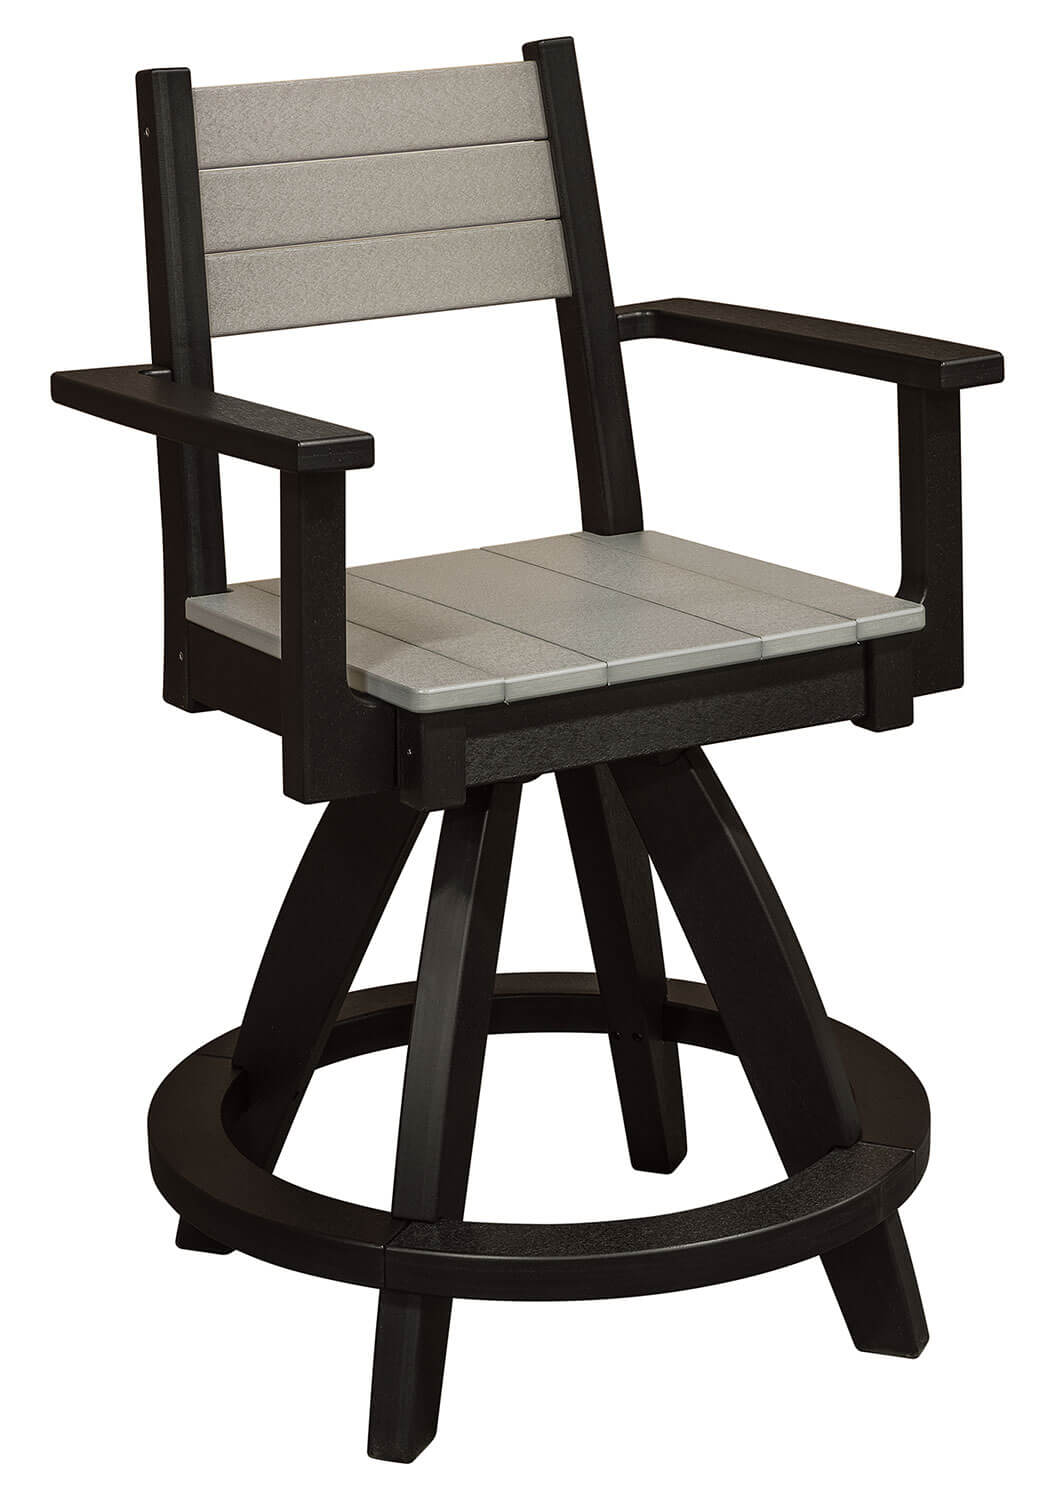 EC Woods Acadia Outdoor Poly Counter Height Swivel Chair Shown in Light Gray and Black